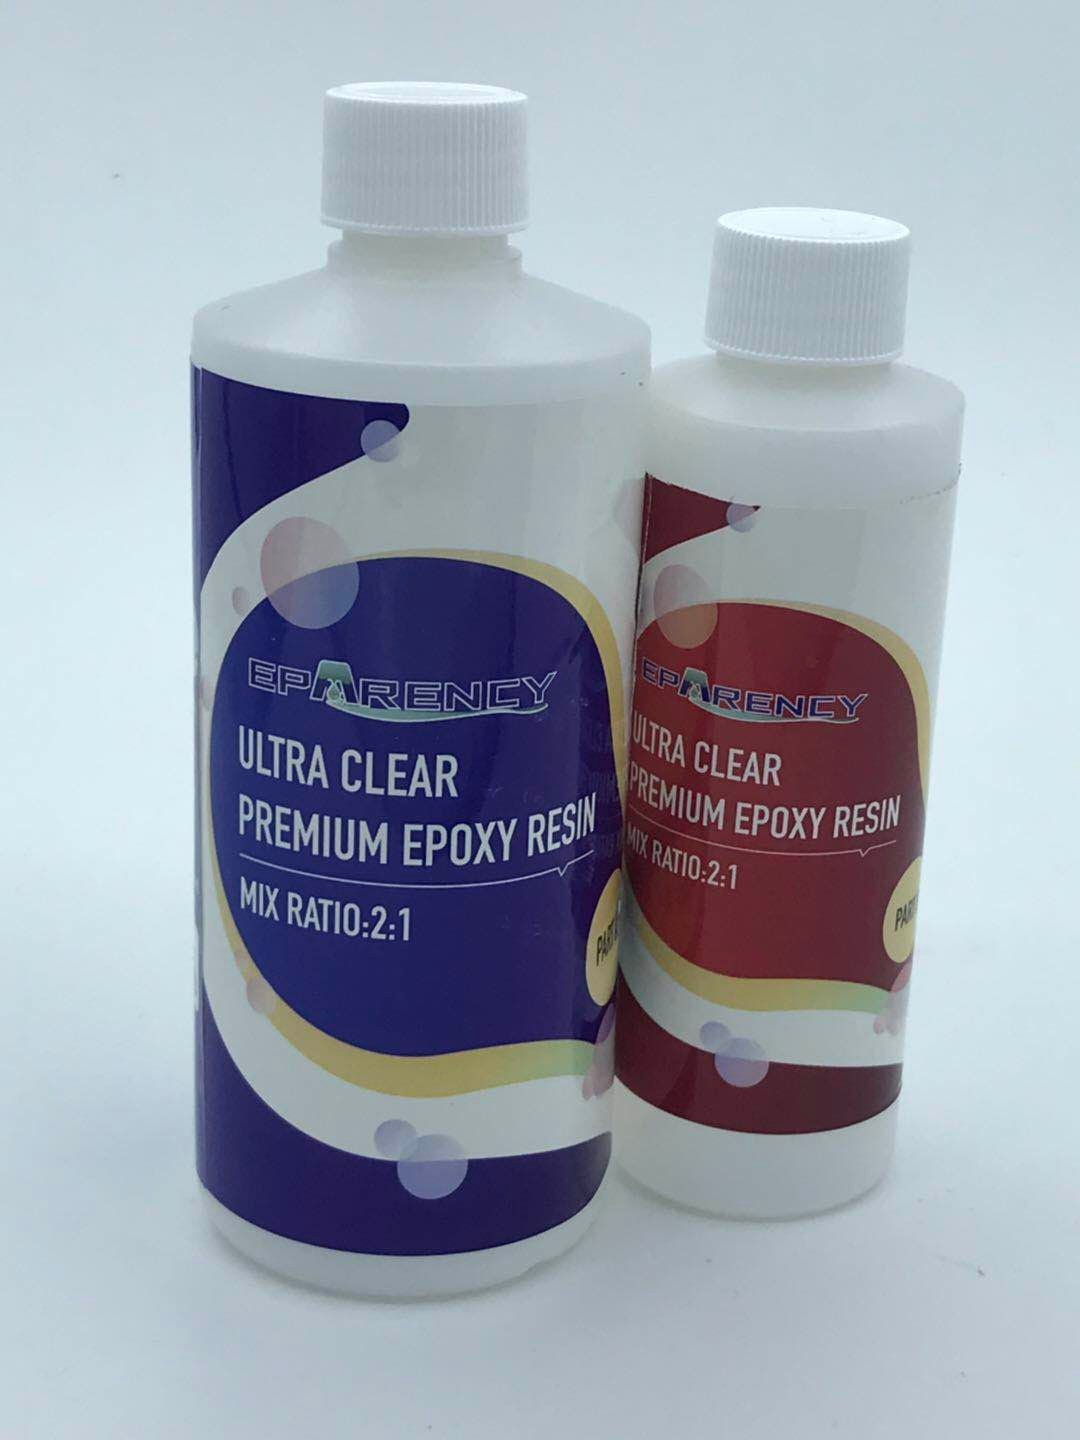 375ml Epoxy Resin Aussie Local Made Eparency Ultra Clear Art Resin 